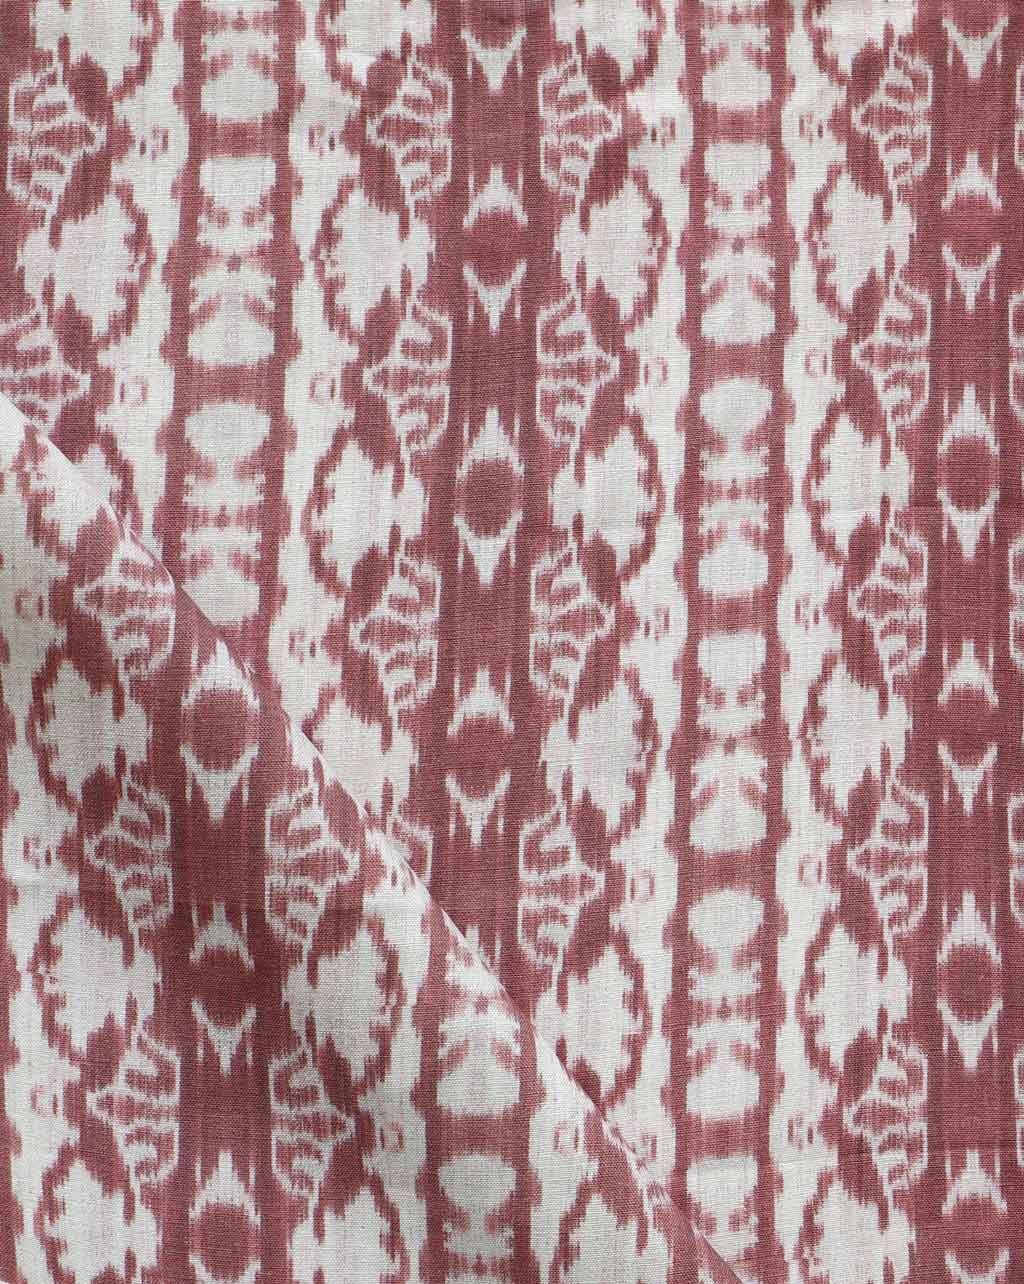 A red and white Bali Stripe Fabric with a geometric pattern offers a high-end and luxurious look.